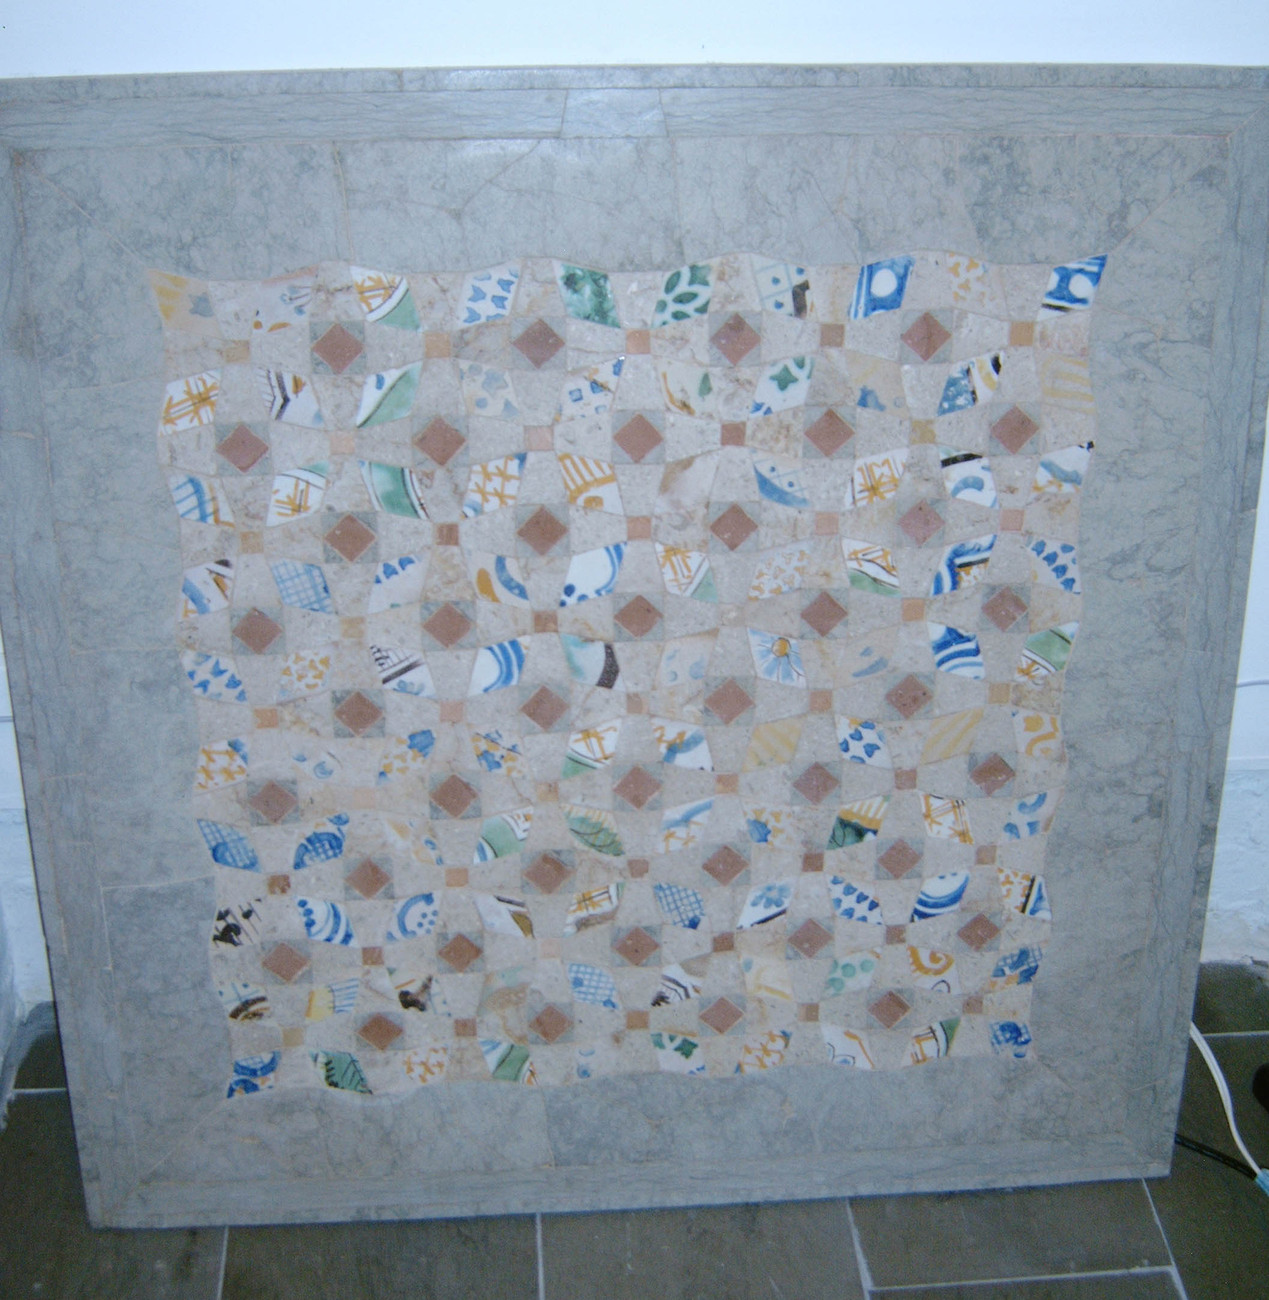 Mosaic inlaid Table with Reclaimed Tiles - $1,495.00